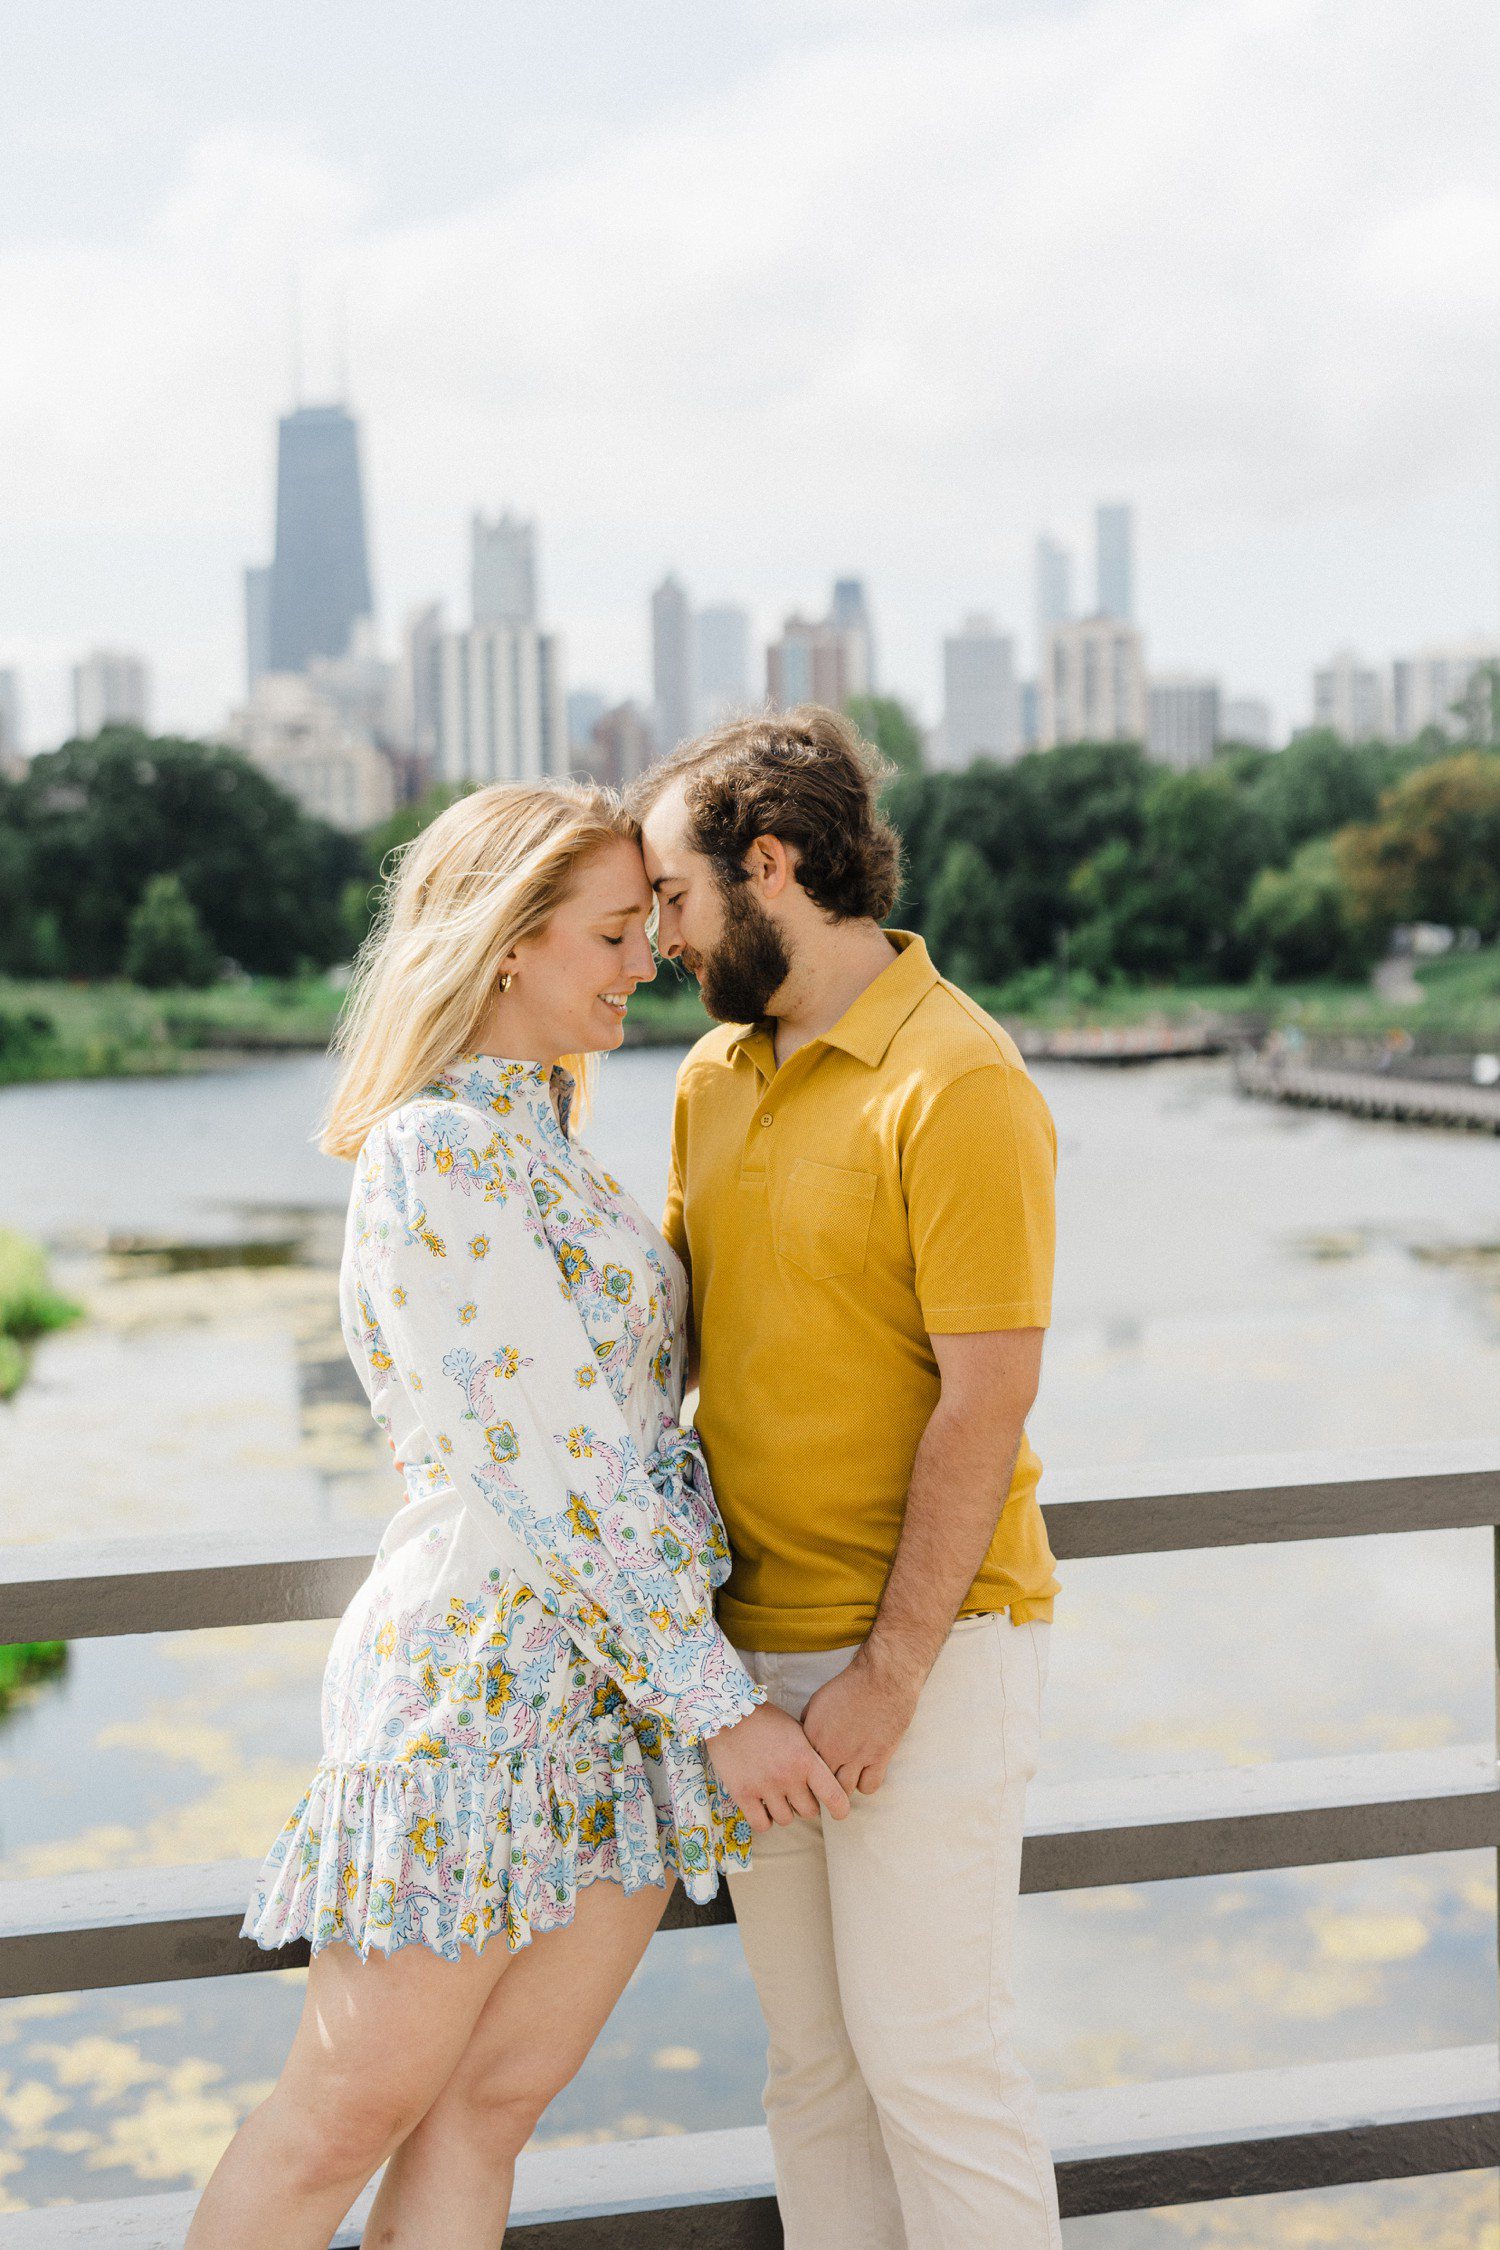 Downtown Chicago engagement photos at Lincoln Park.